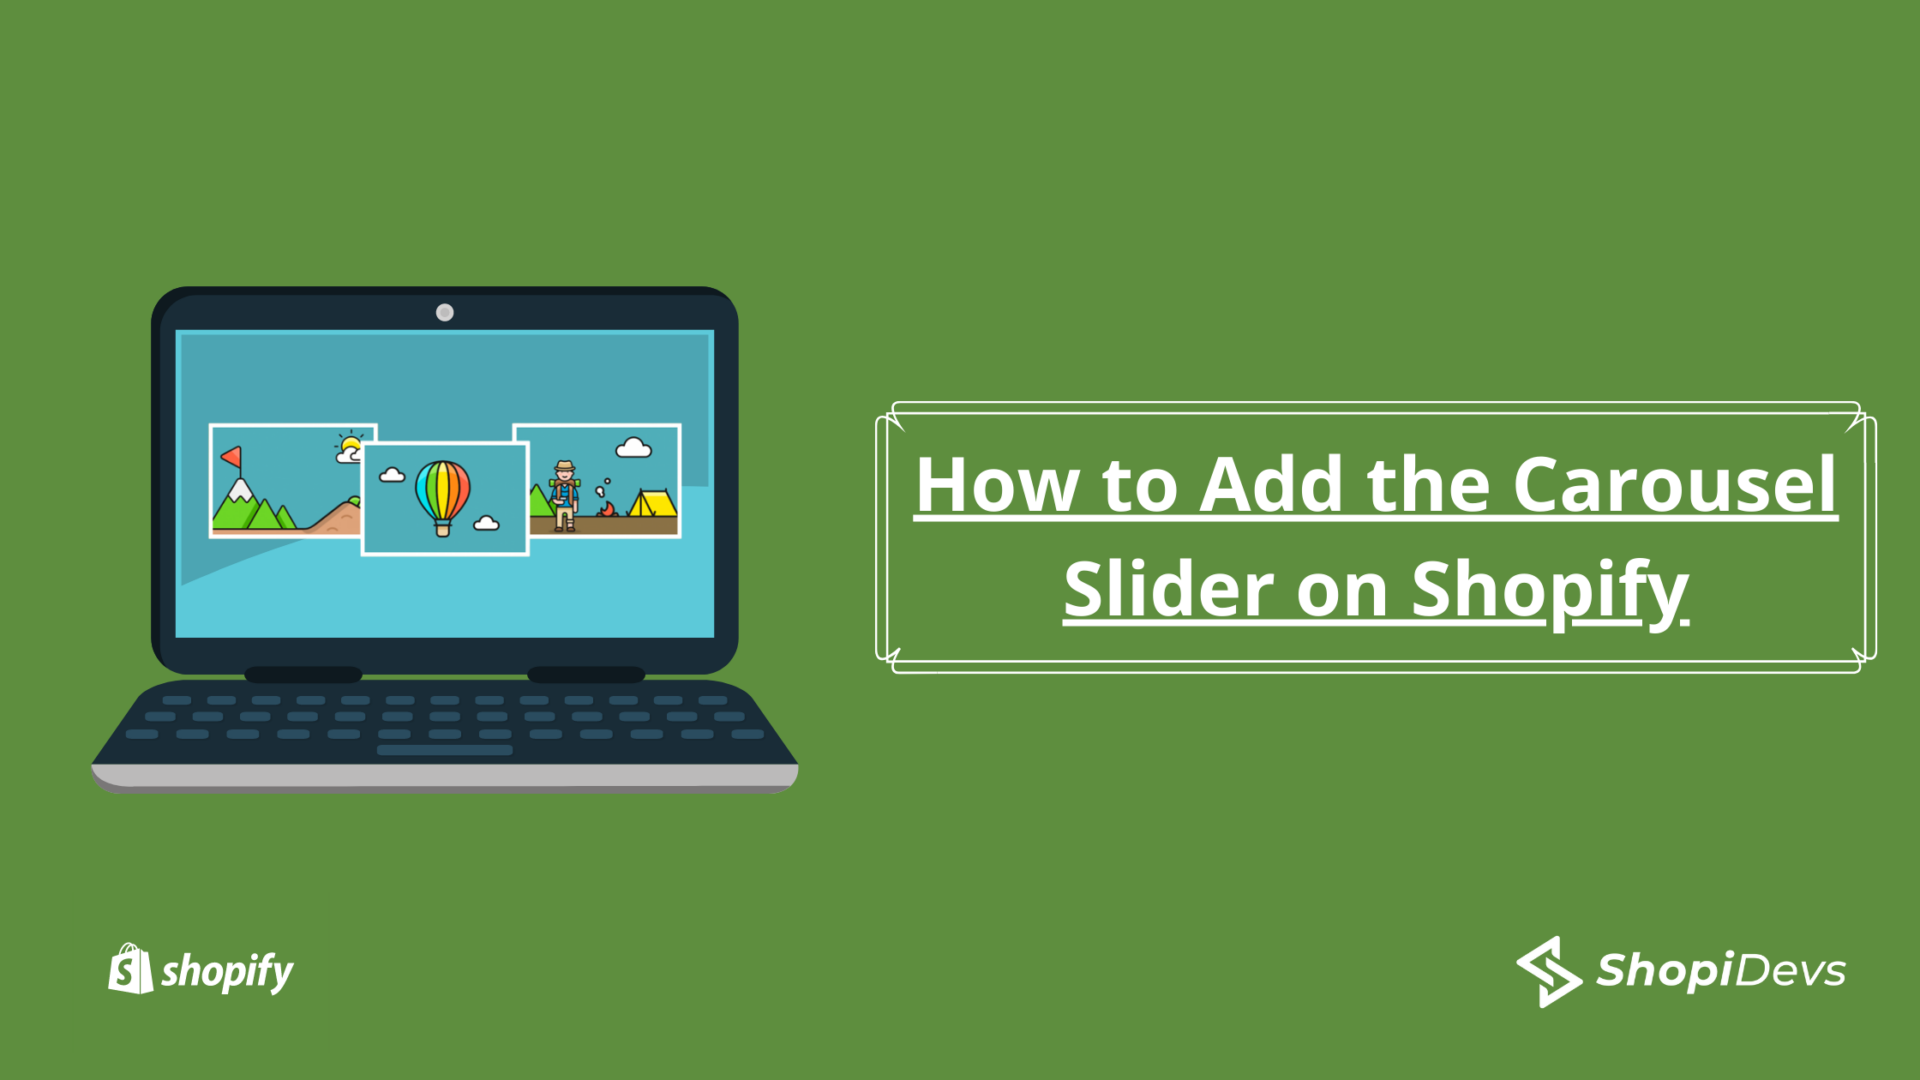 How to Add the Carousel Slider on Shopify